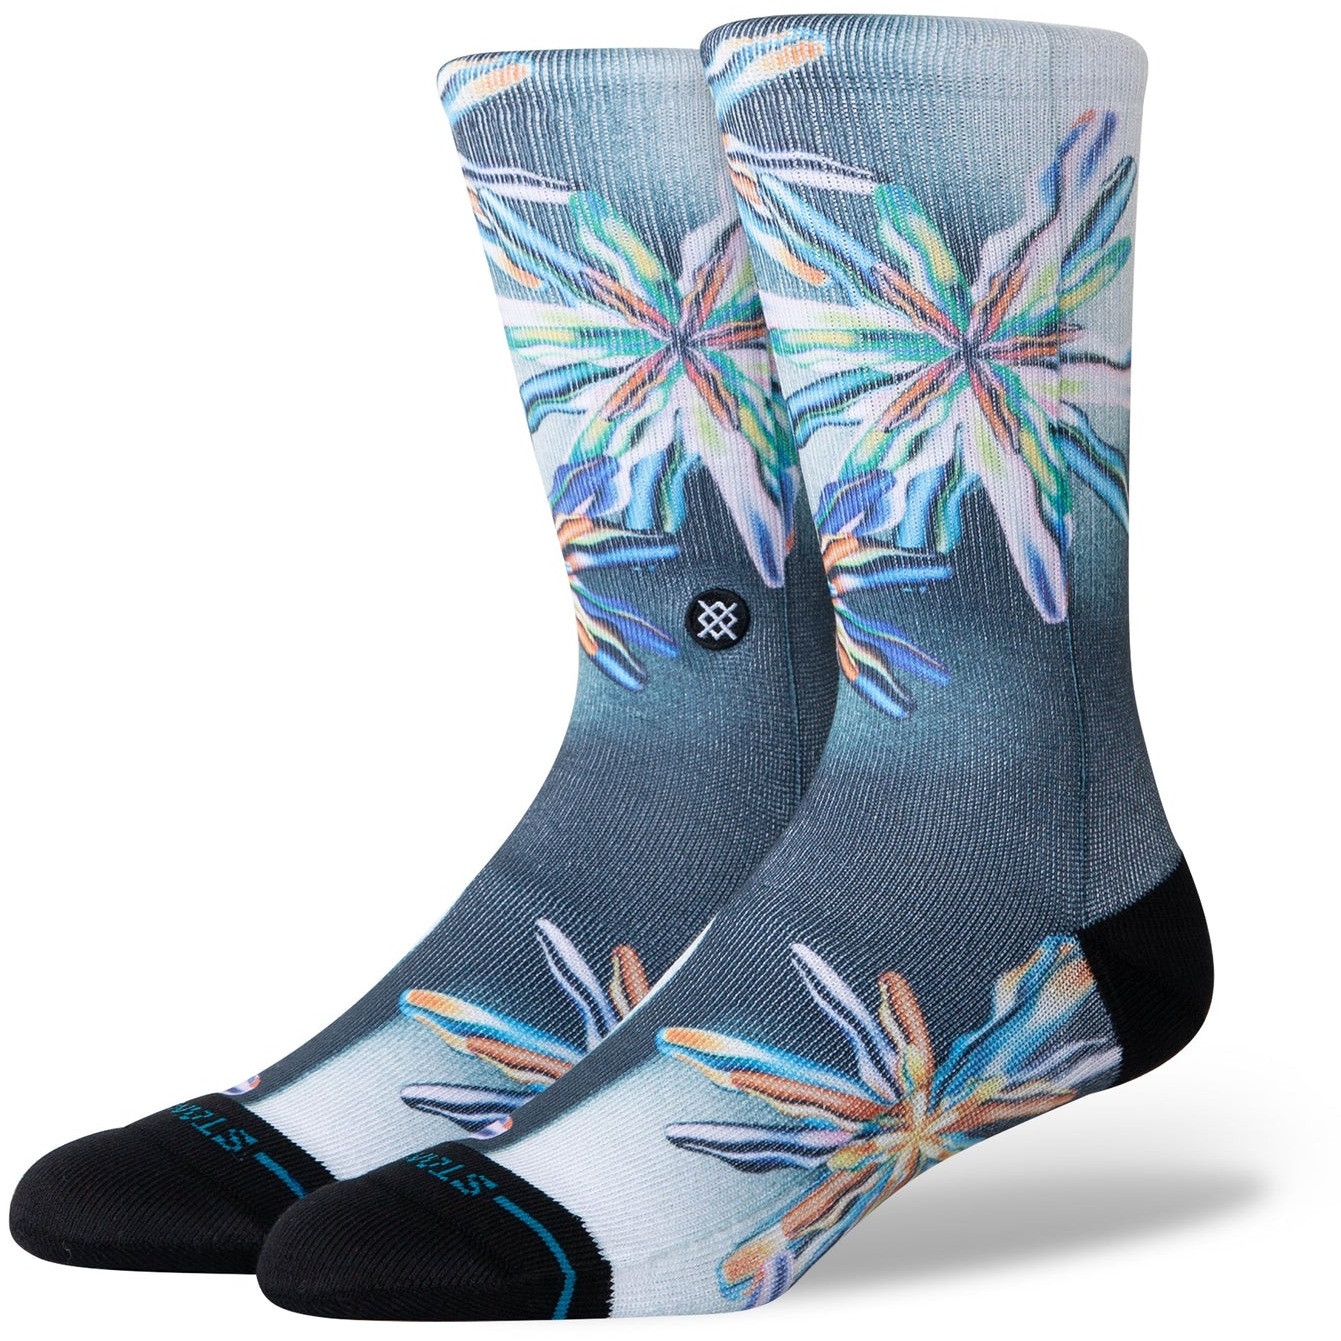 Picture of Stance Coyoacan Crew Socks Unisex - multi